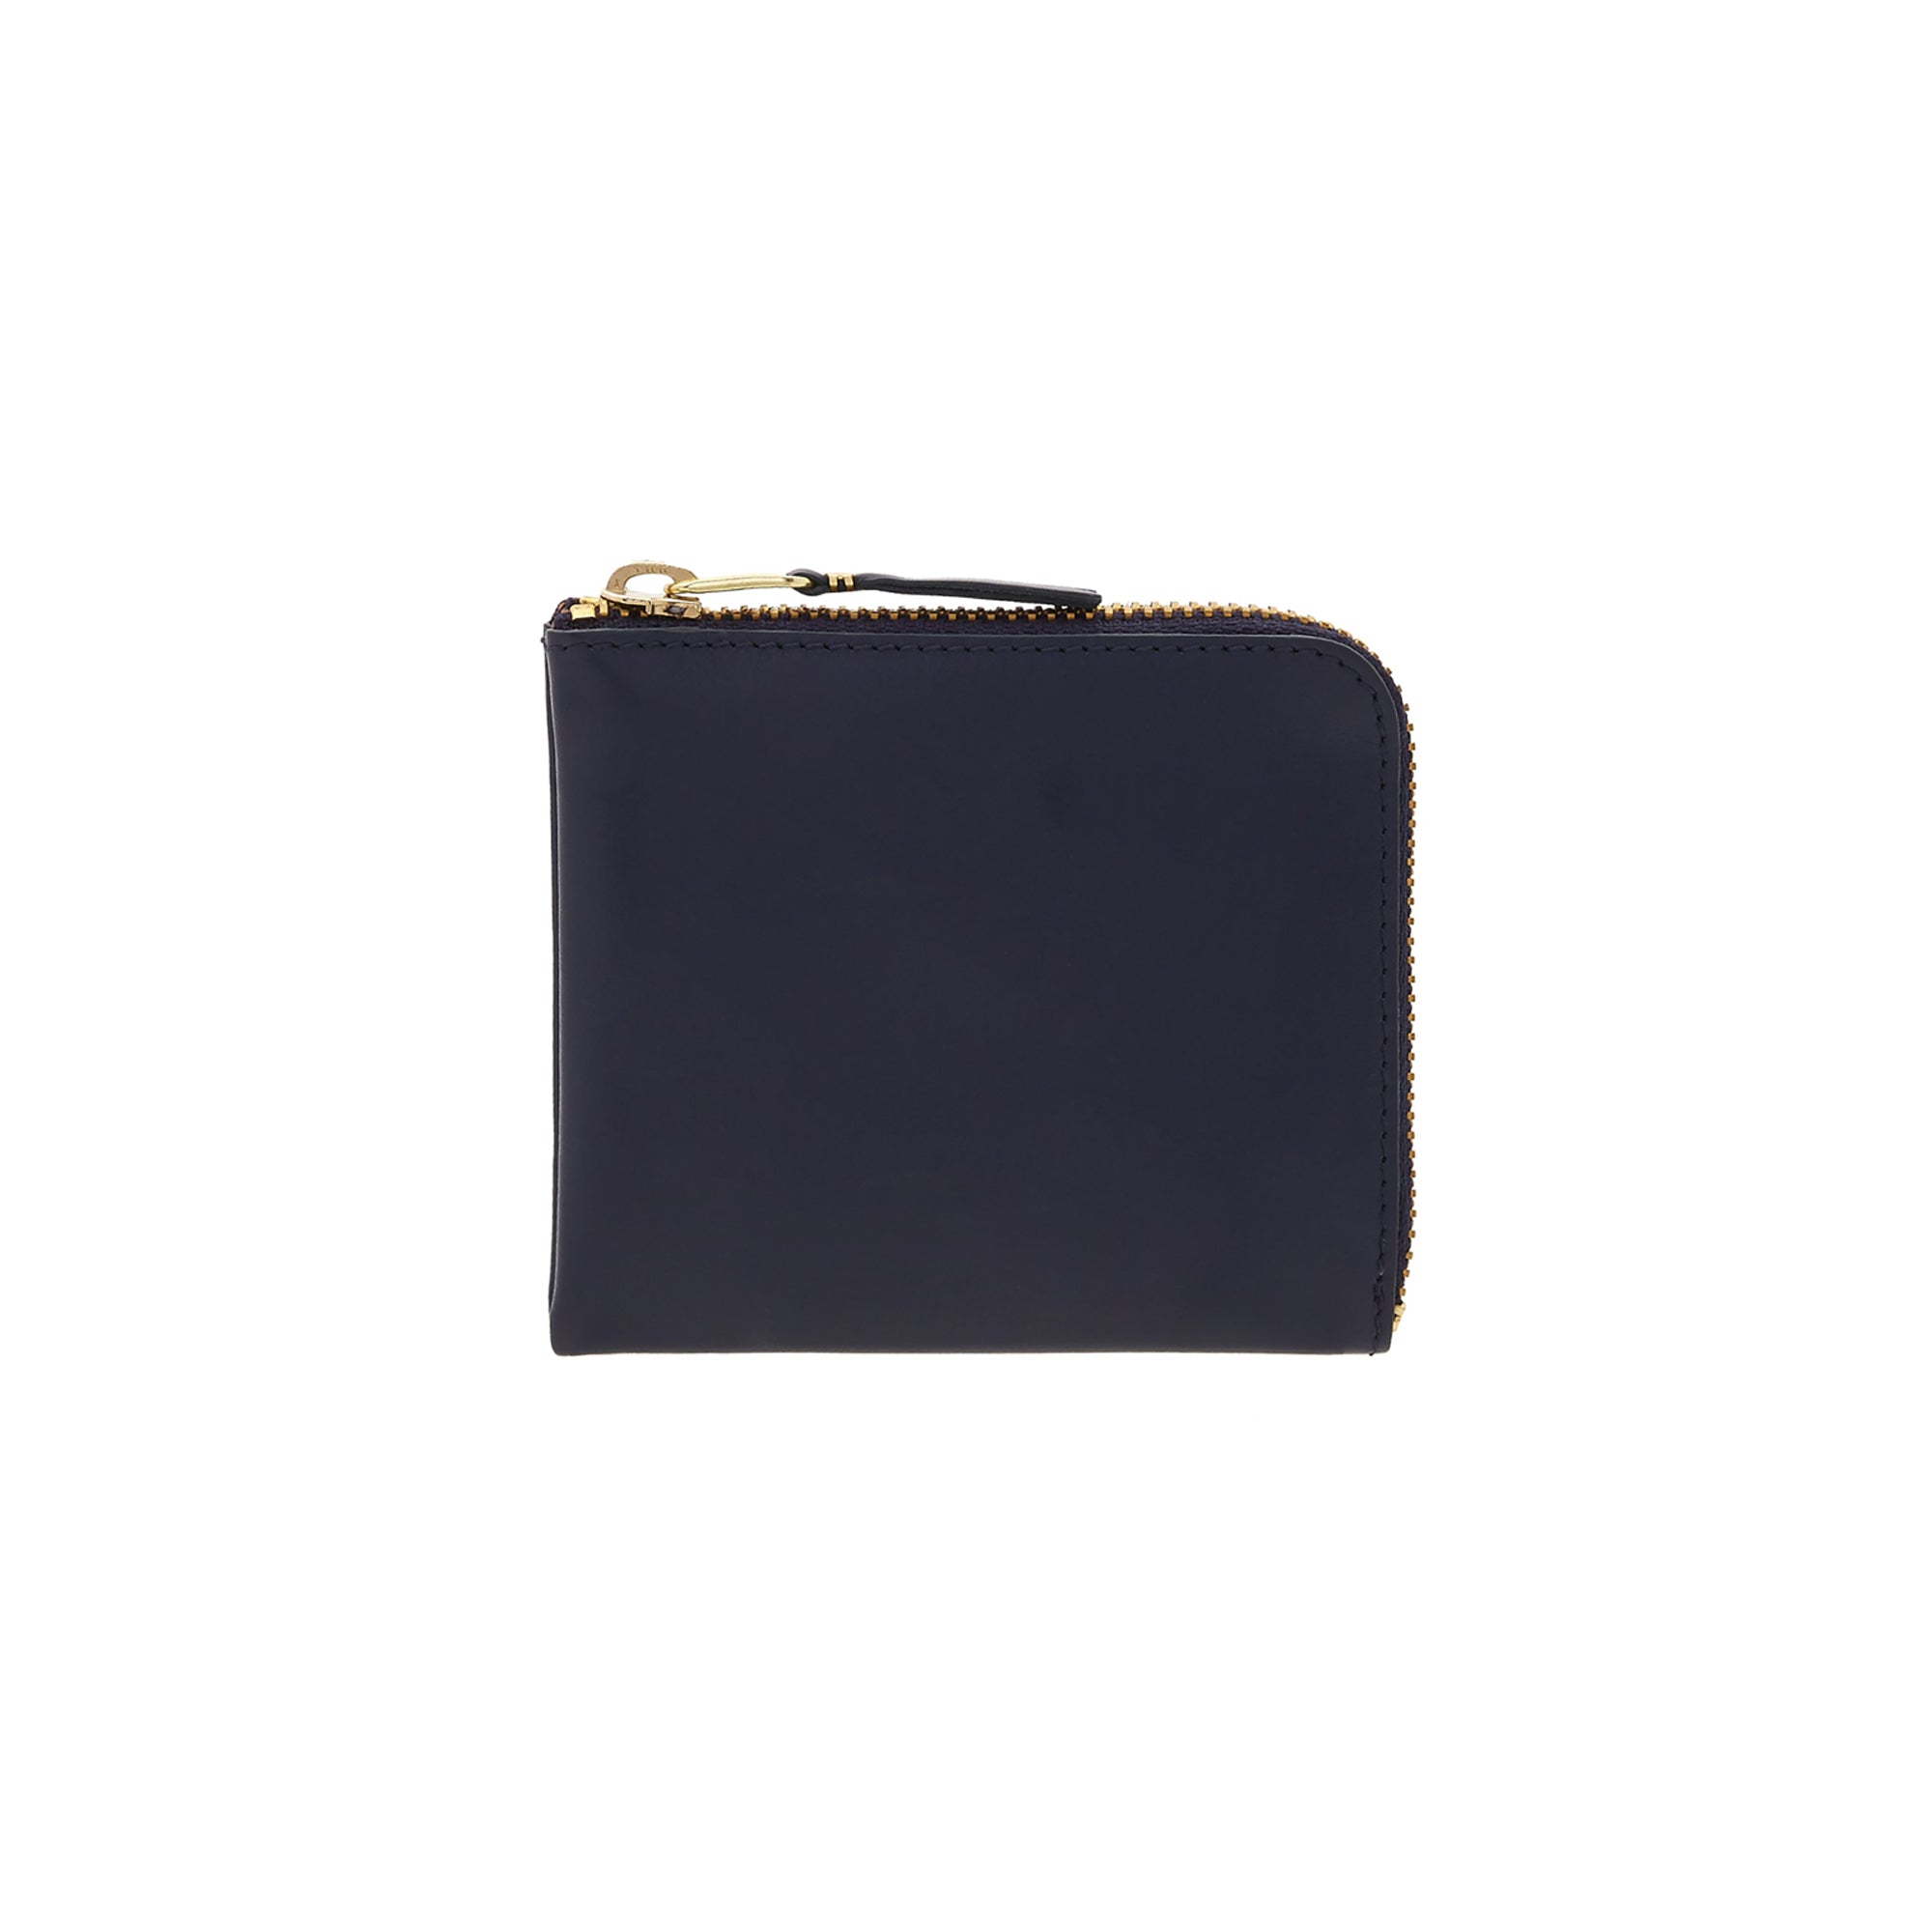 CDG WALLET - Classic Leather Line - (SA3100 NAVY) view 1